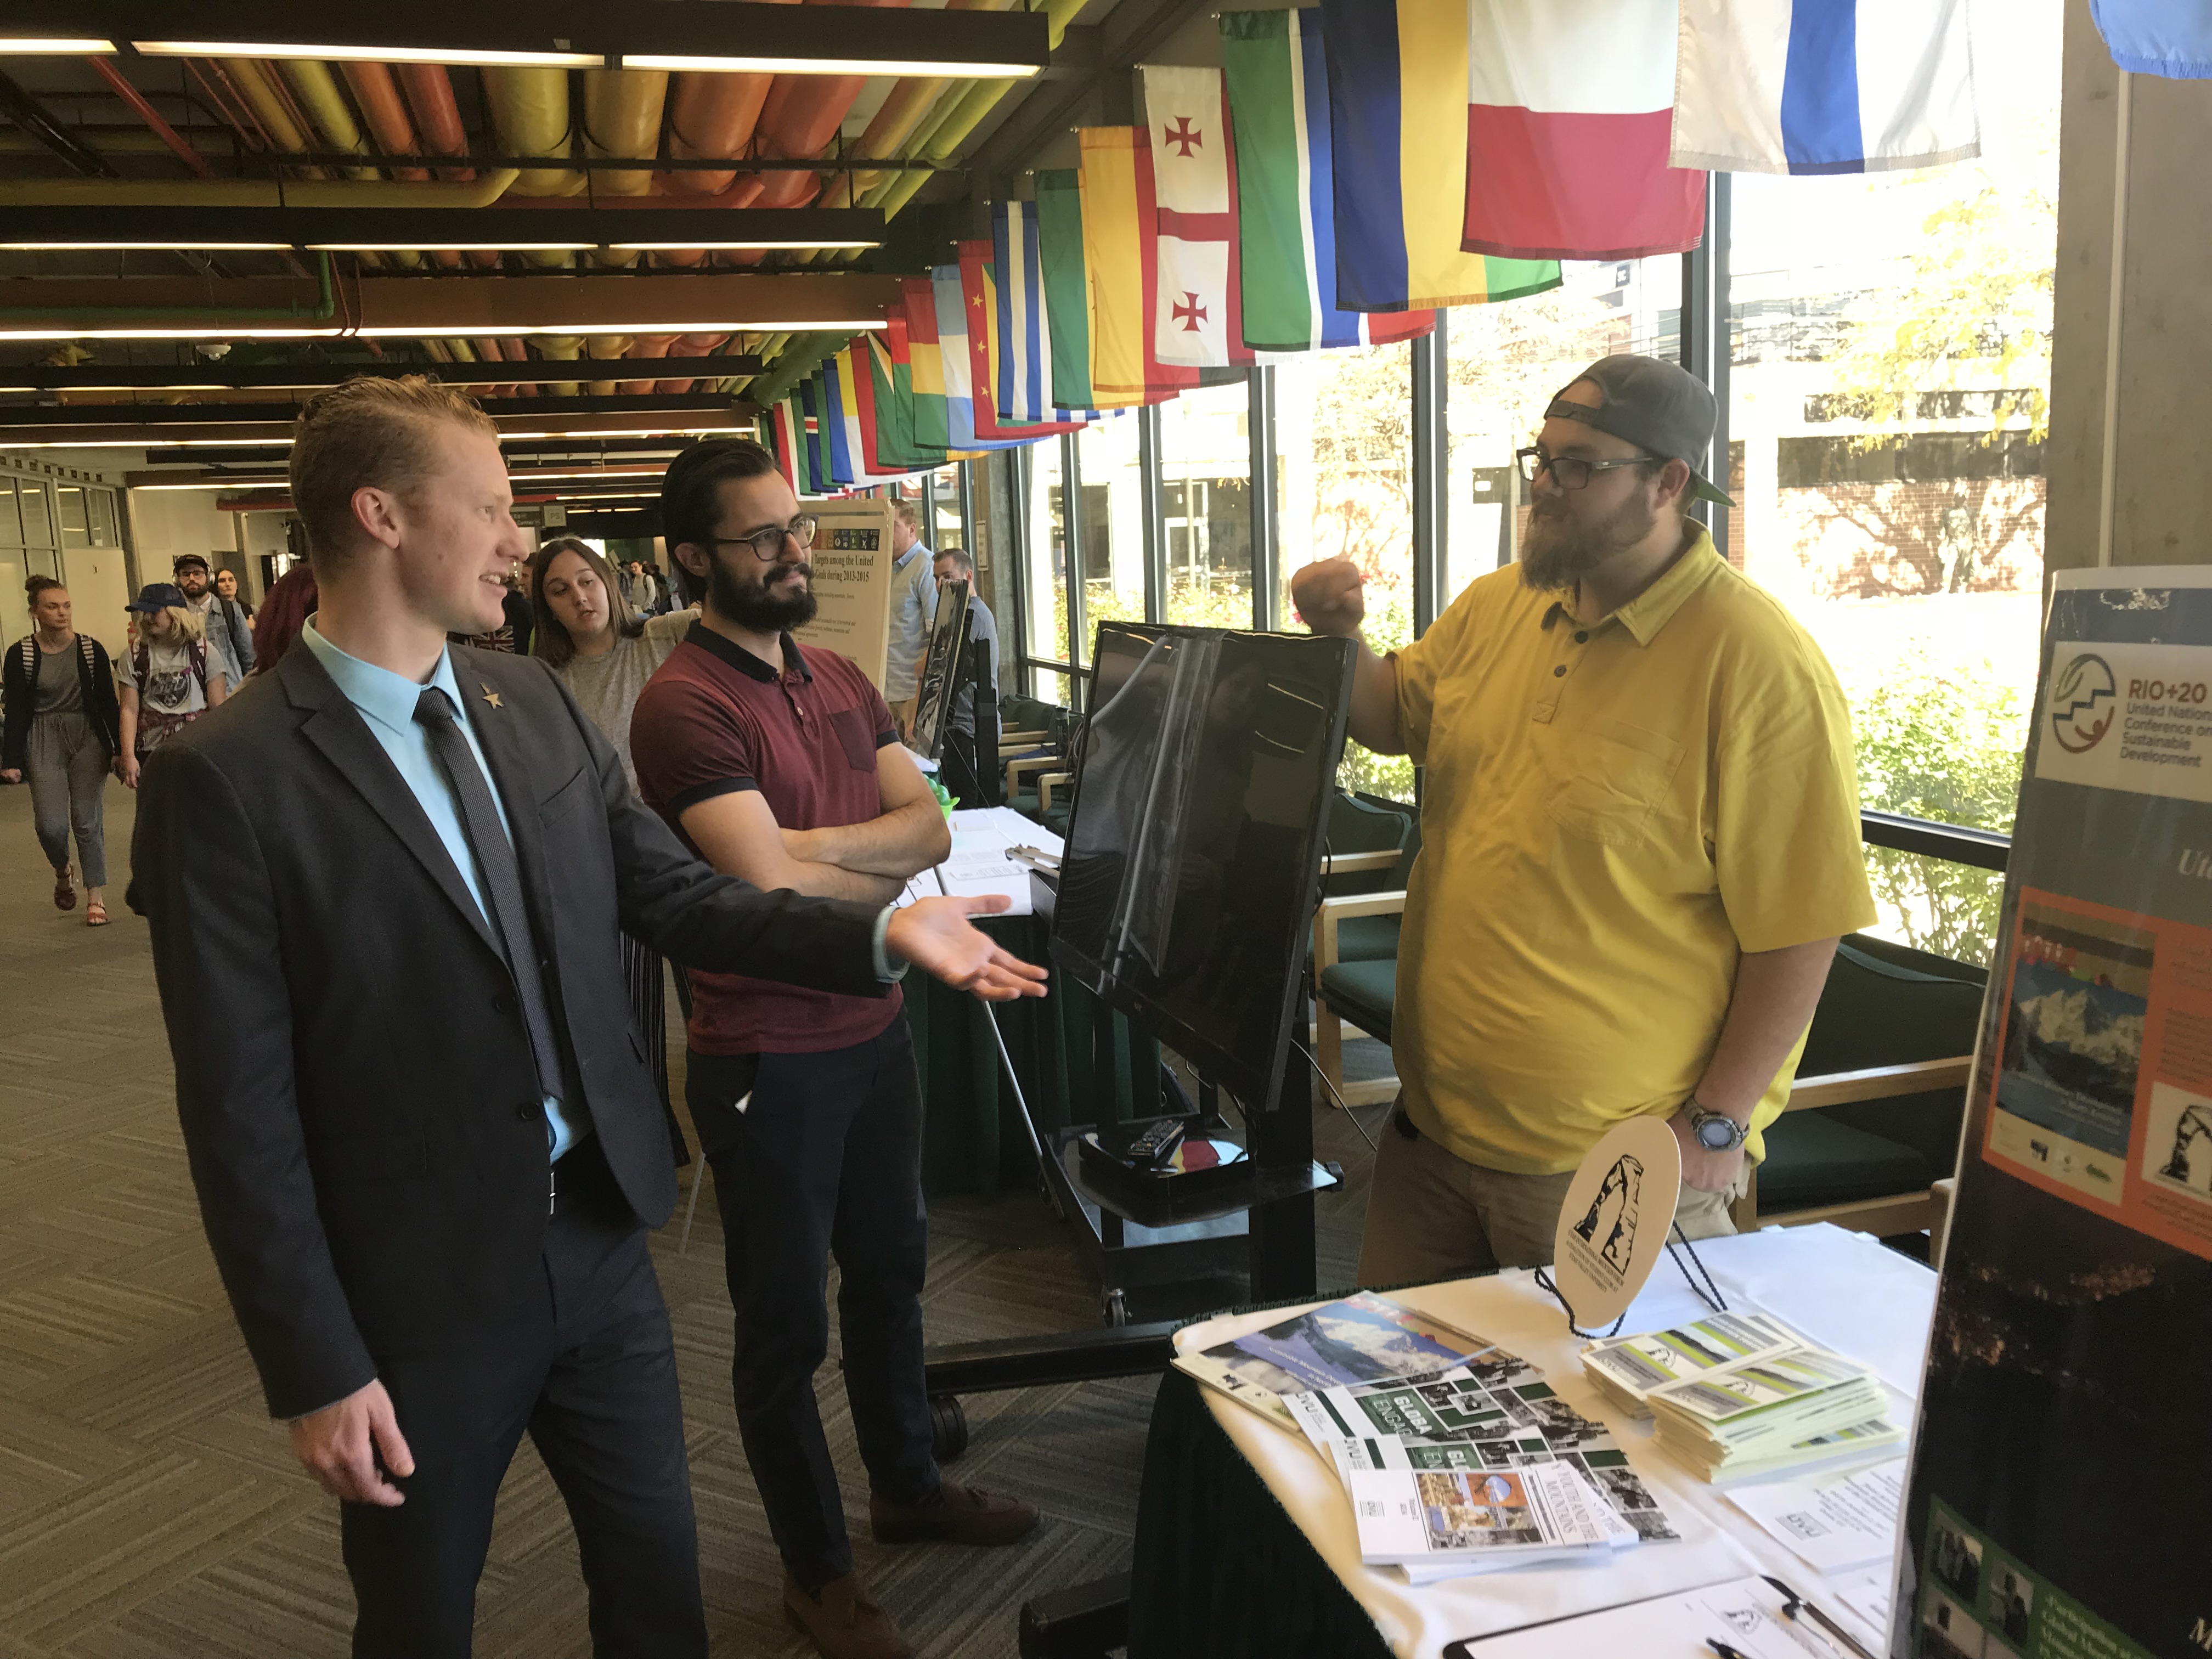 UVU students raise awareness about the SDG mountain targets on UN Day 2017.